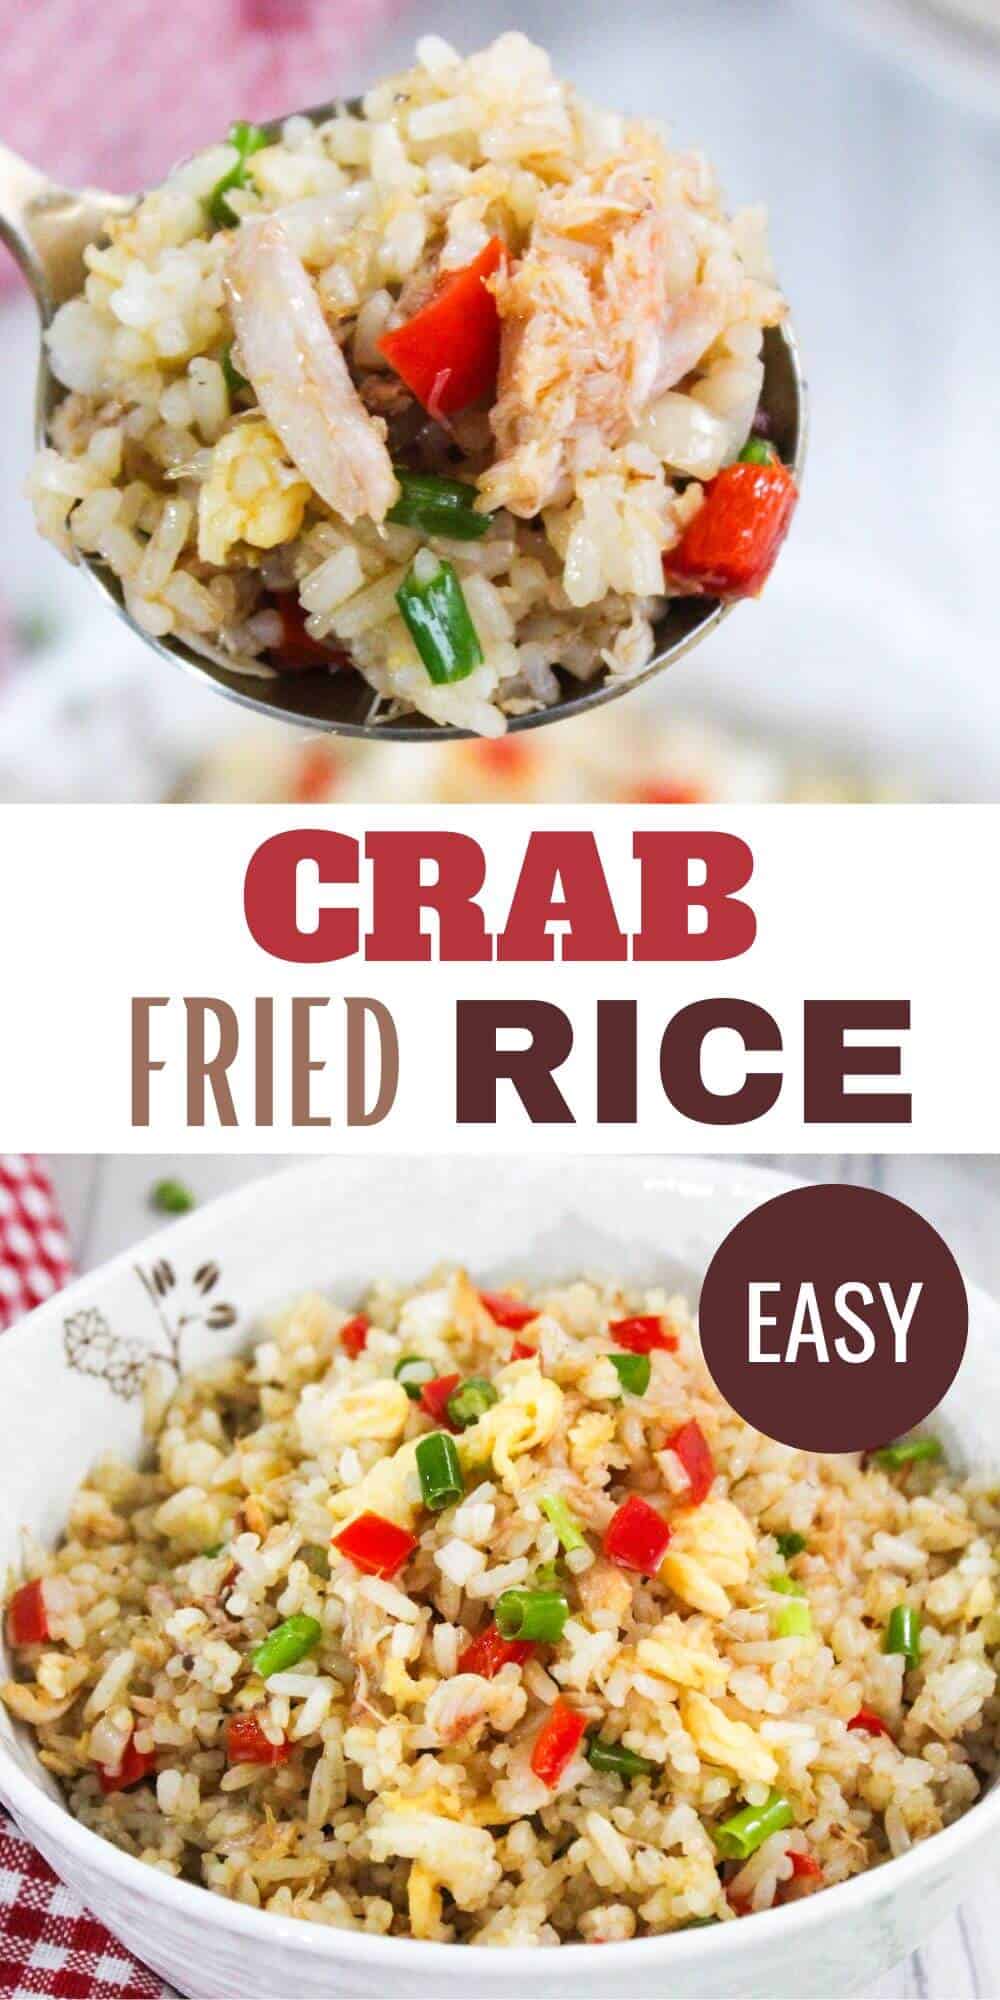 Crab fried rice in a bowl with a spoon.